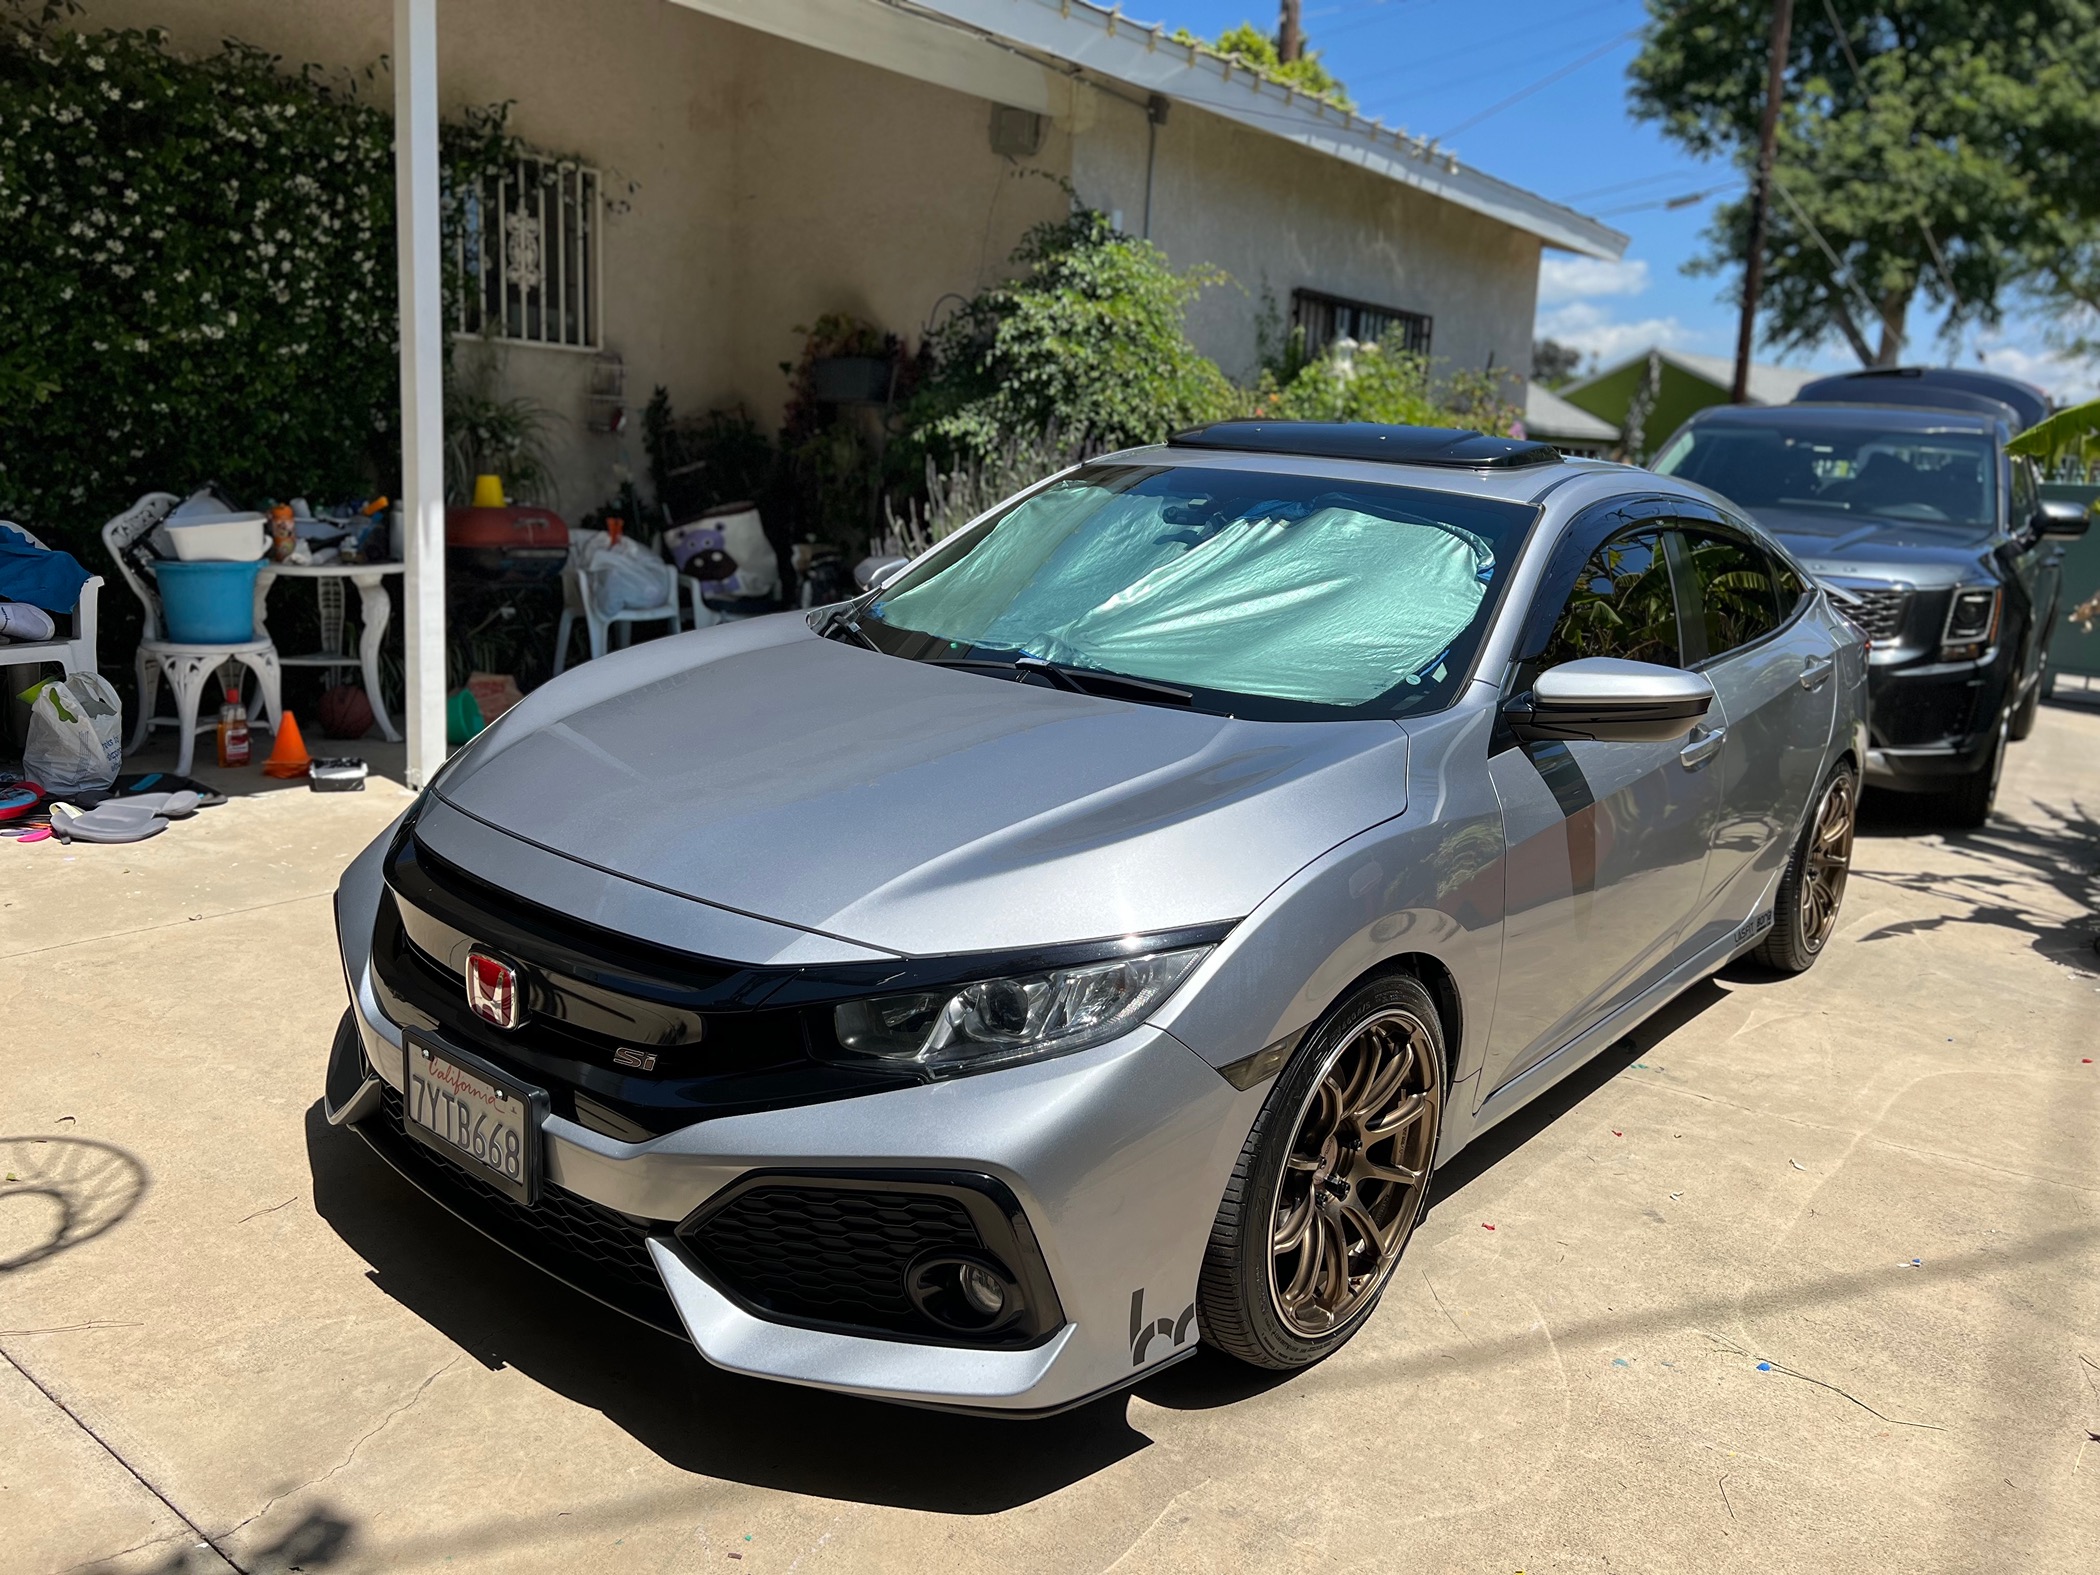 Honda Civic 10th gen What's your SI looking like today? IMG_0145